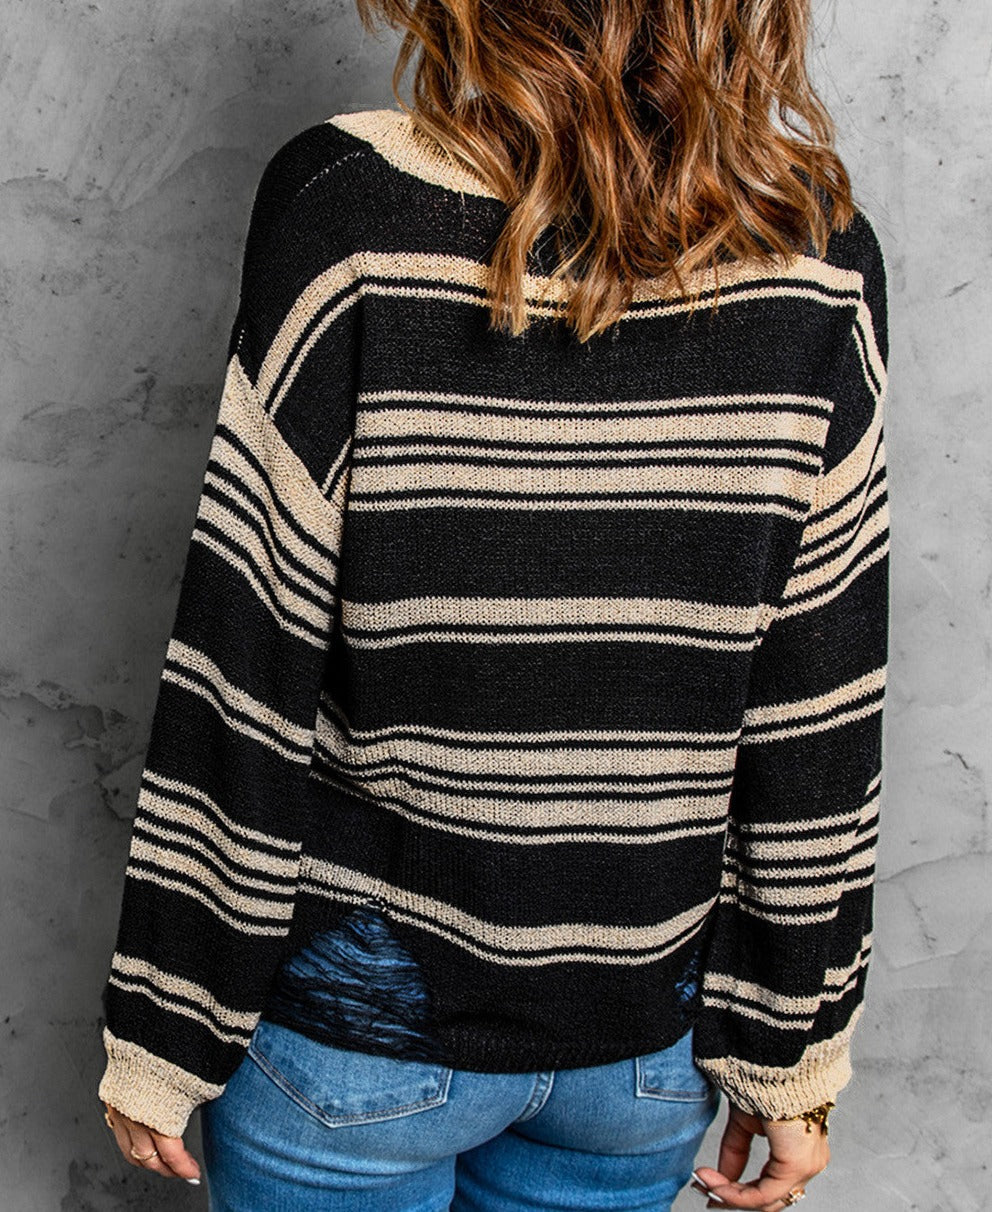 Distressed Detail Striped Knit Sweater